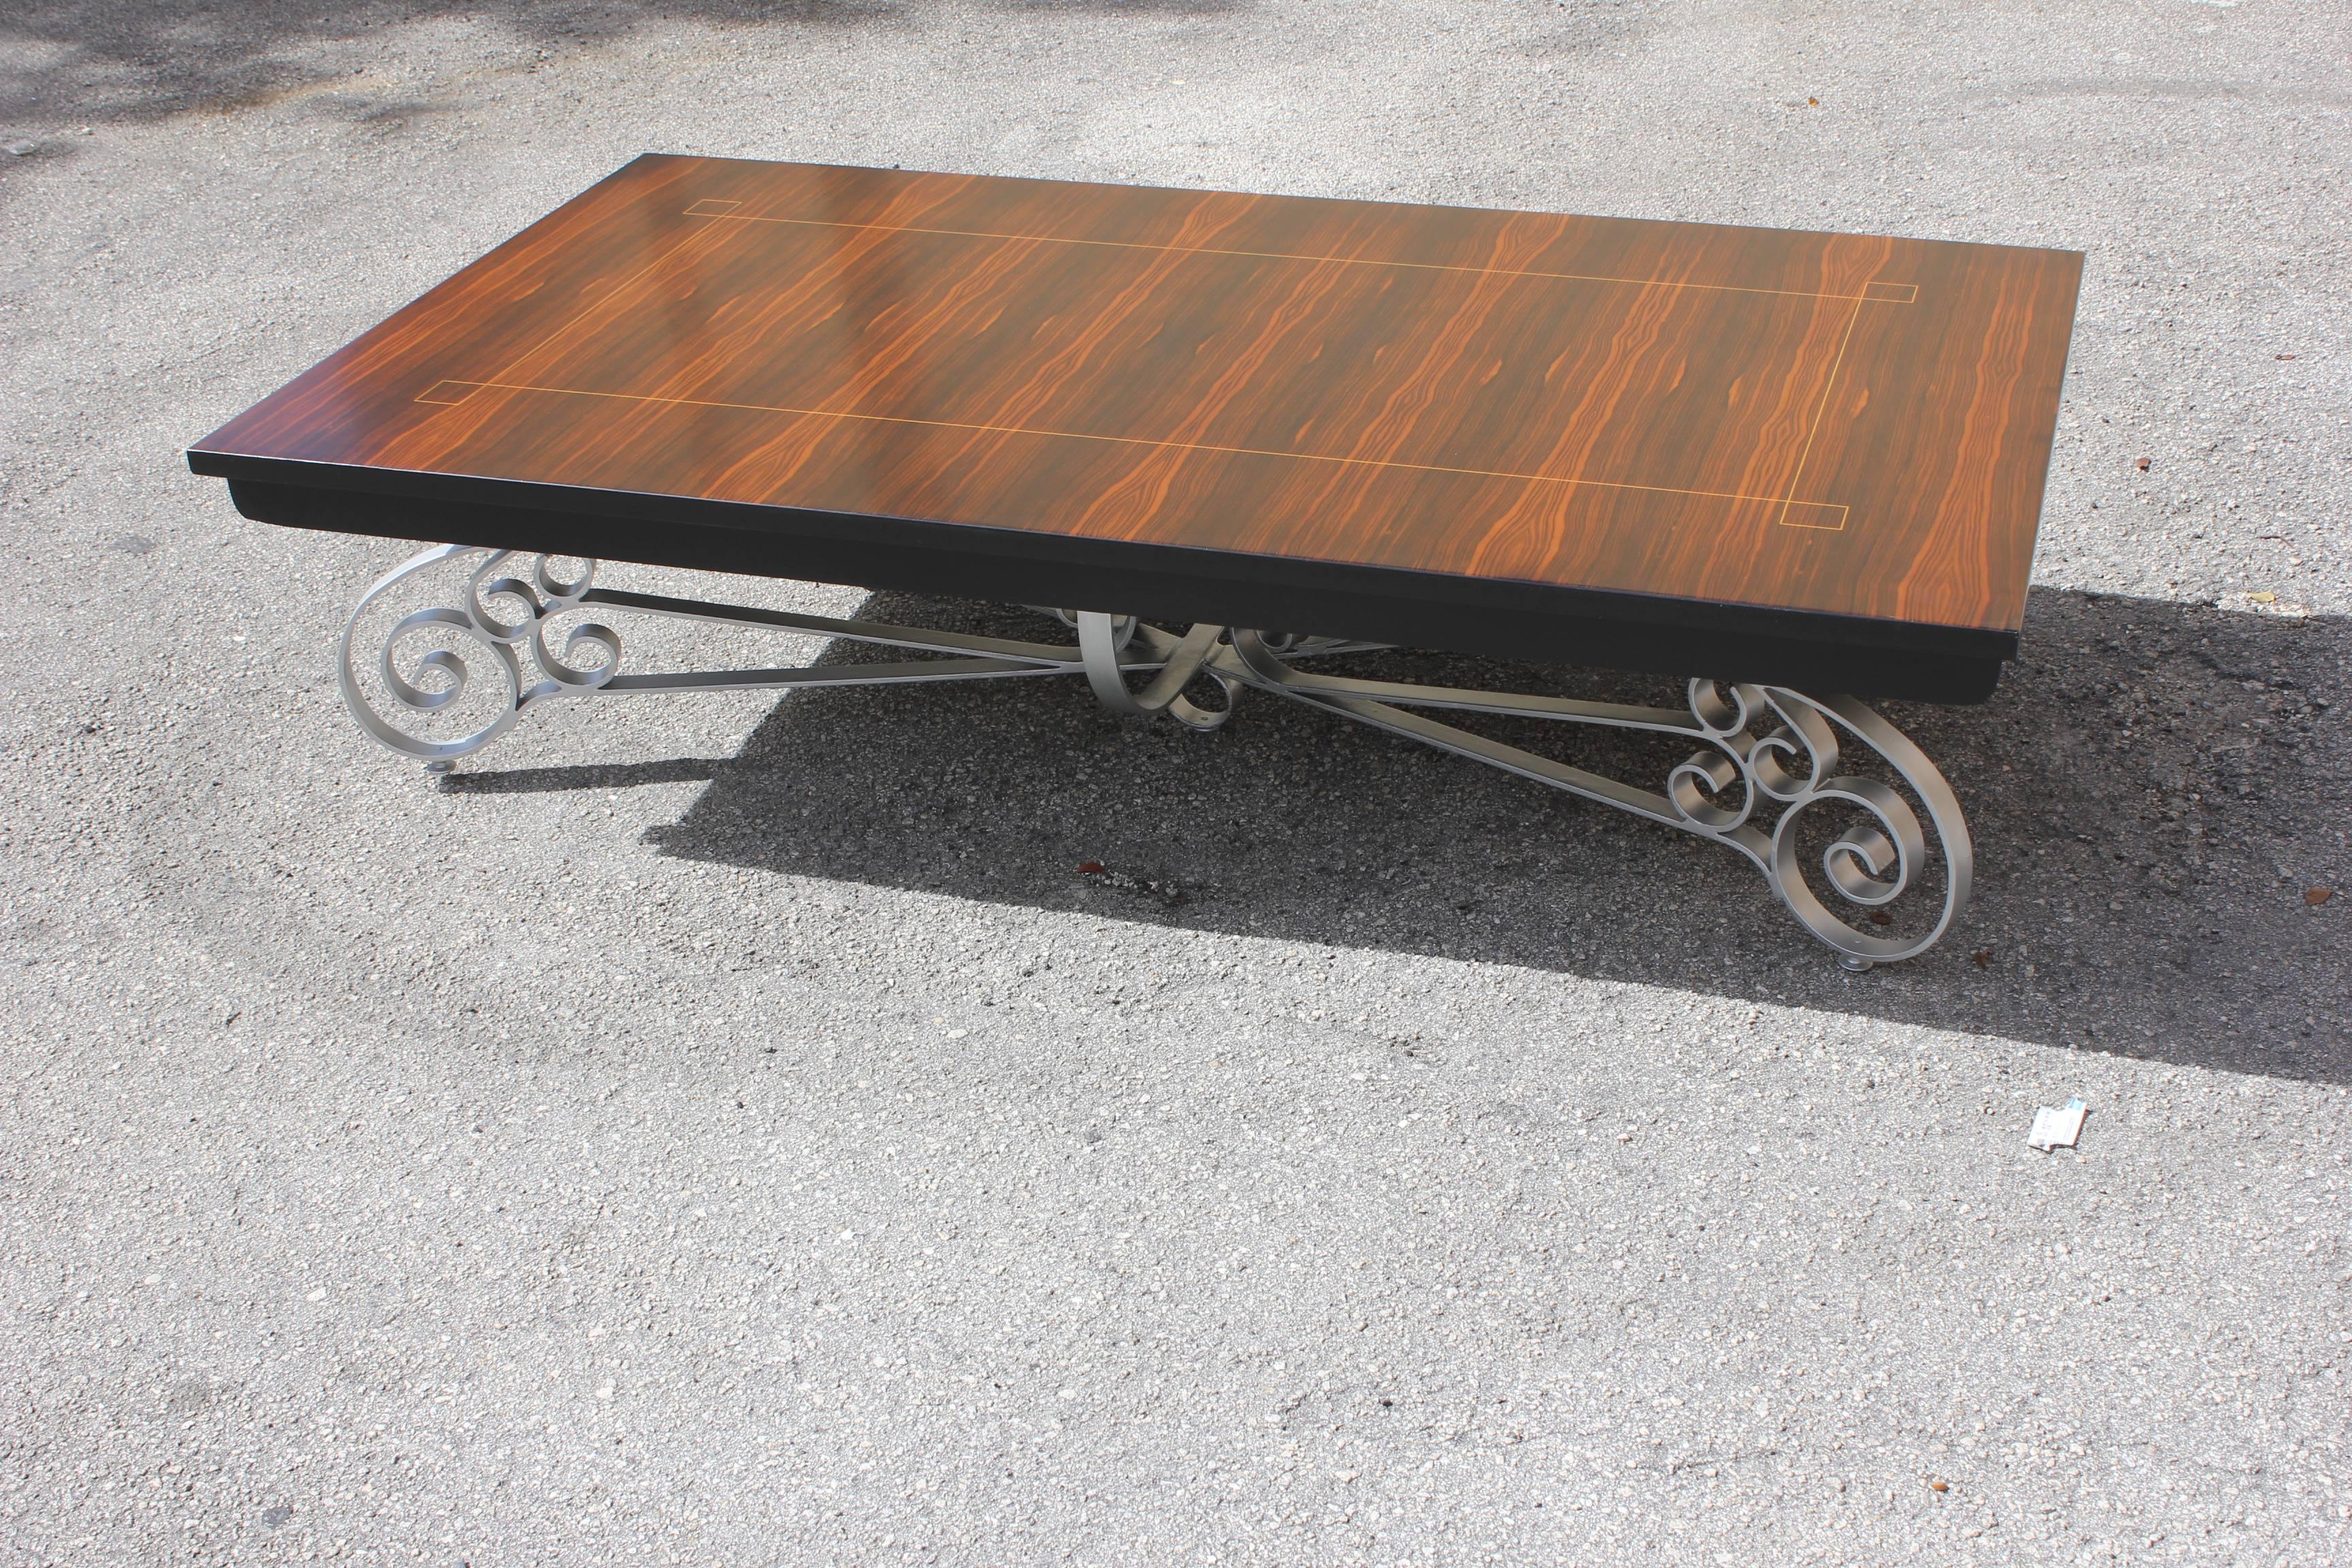 Monumental French Art Deco beautiful iron base and detail, exotic Macassar ebony coffee table, circa 1940s, in perfect condition. Size 63 W x 16. 38 H x 35.13 D.